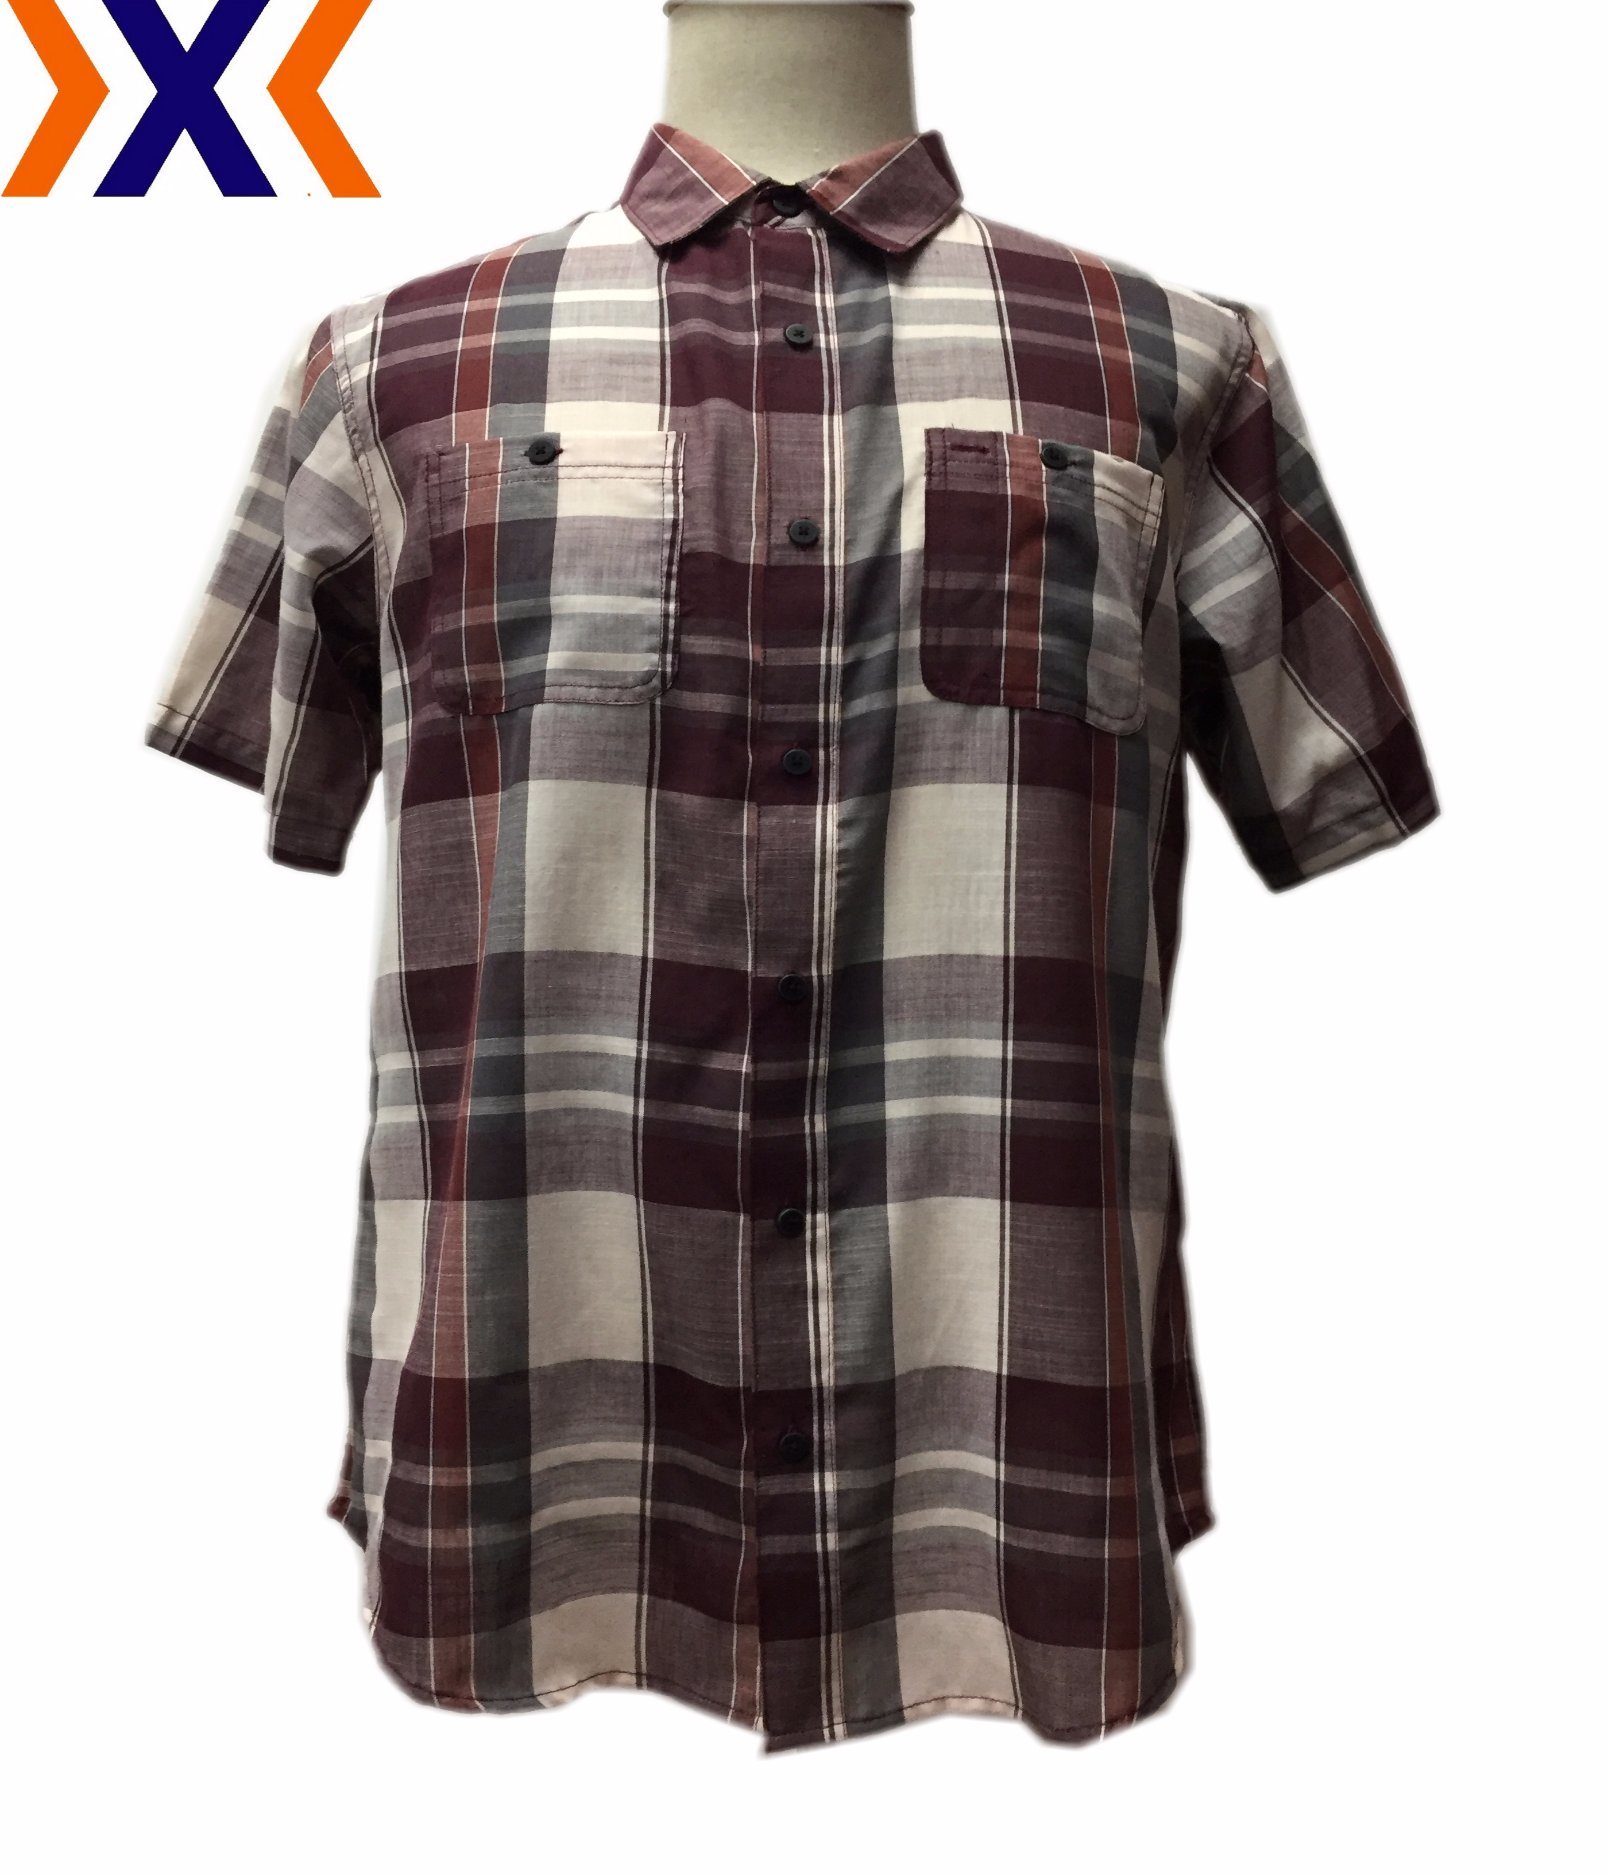 Young Man's Shirt with Y/D Plaid